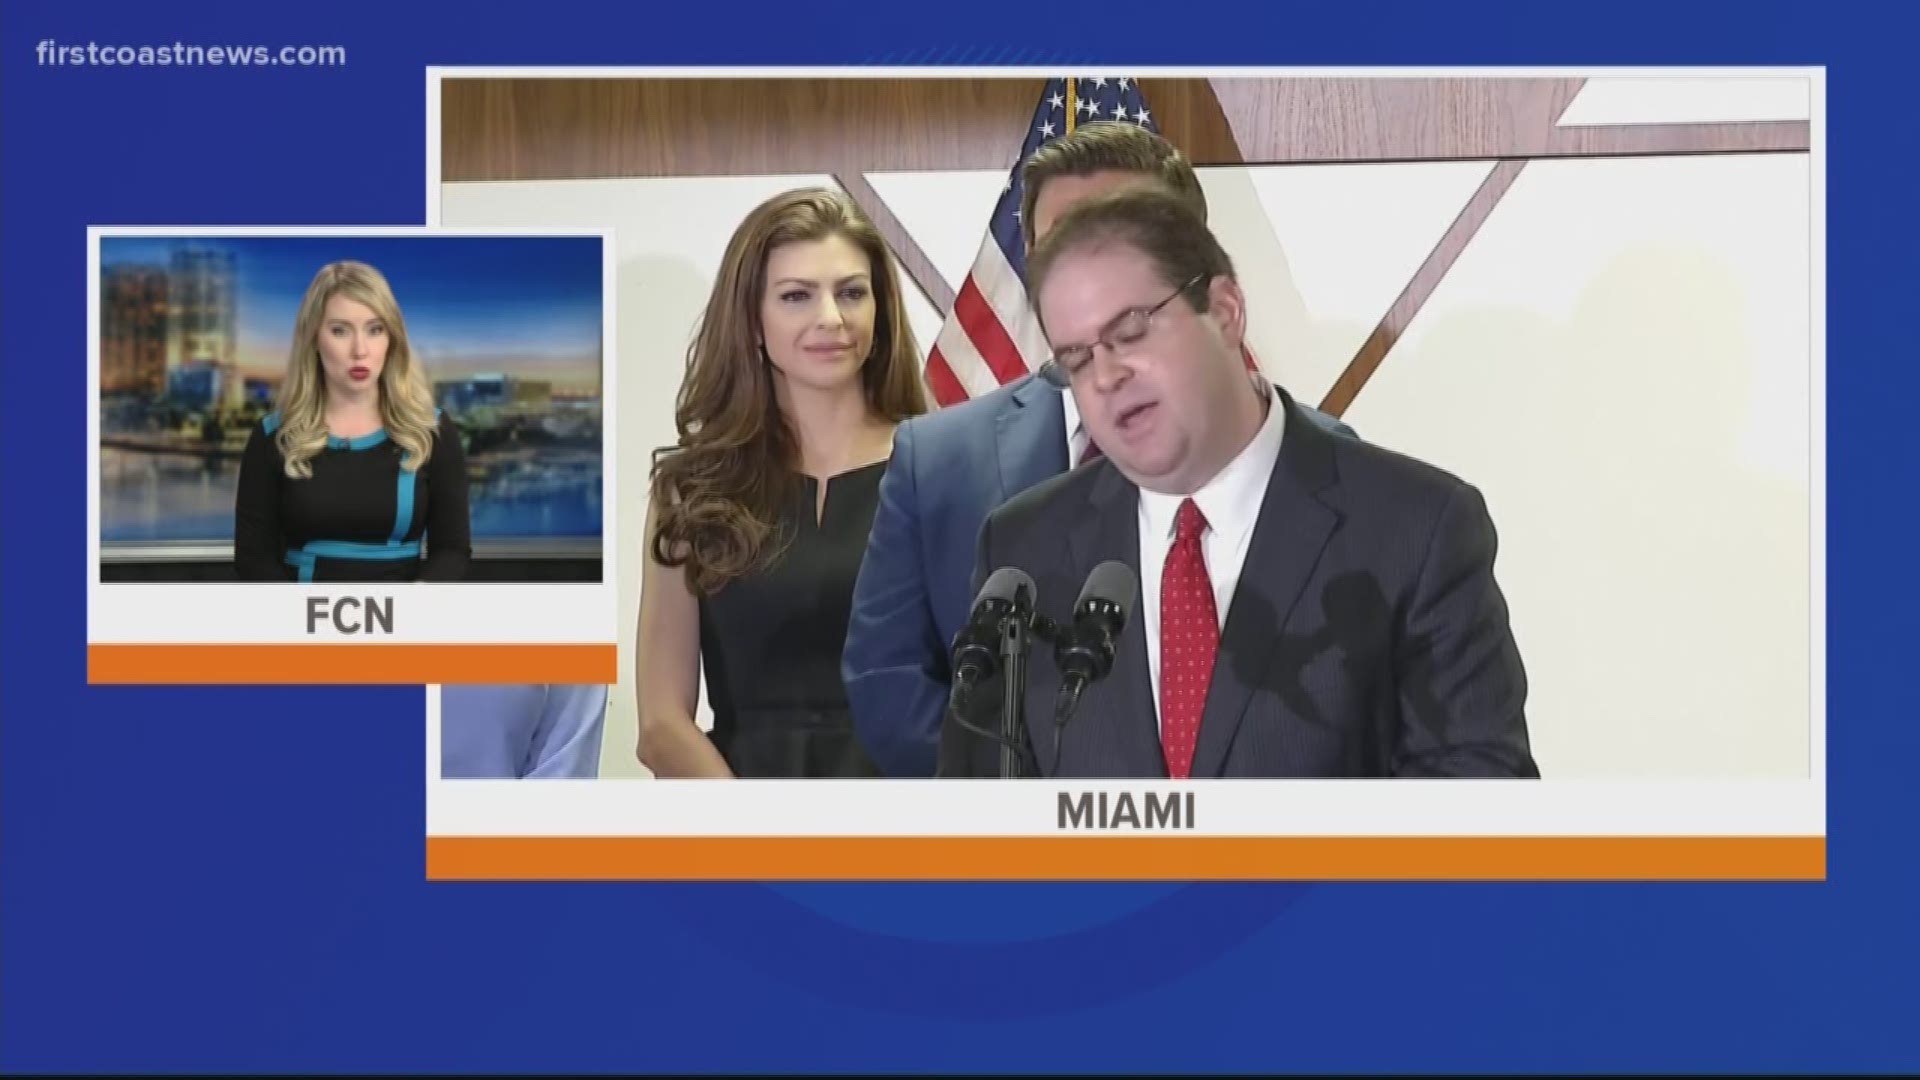 DeSantis announced Monday that Robert Luck is his latest choice. Luck, a former Miami federal prosecutor and circuit court judge, currently serves on the 3rd District Court of Appeal.